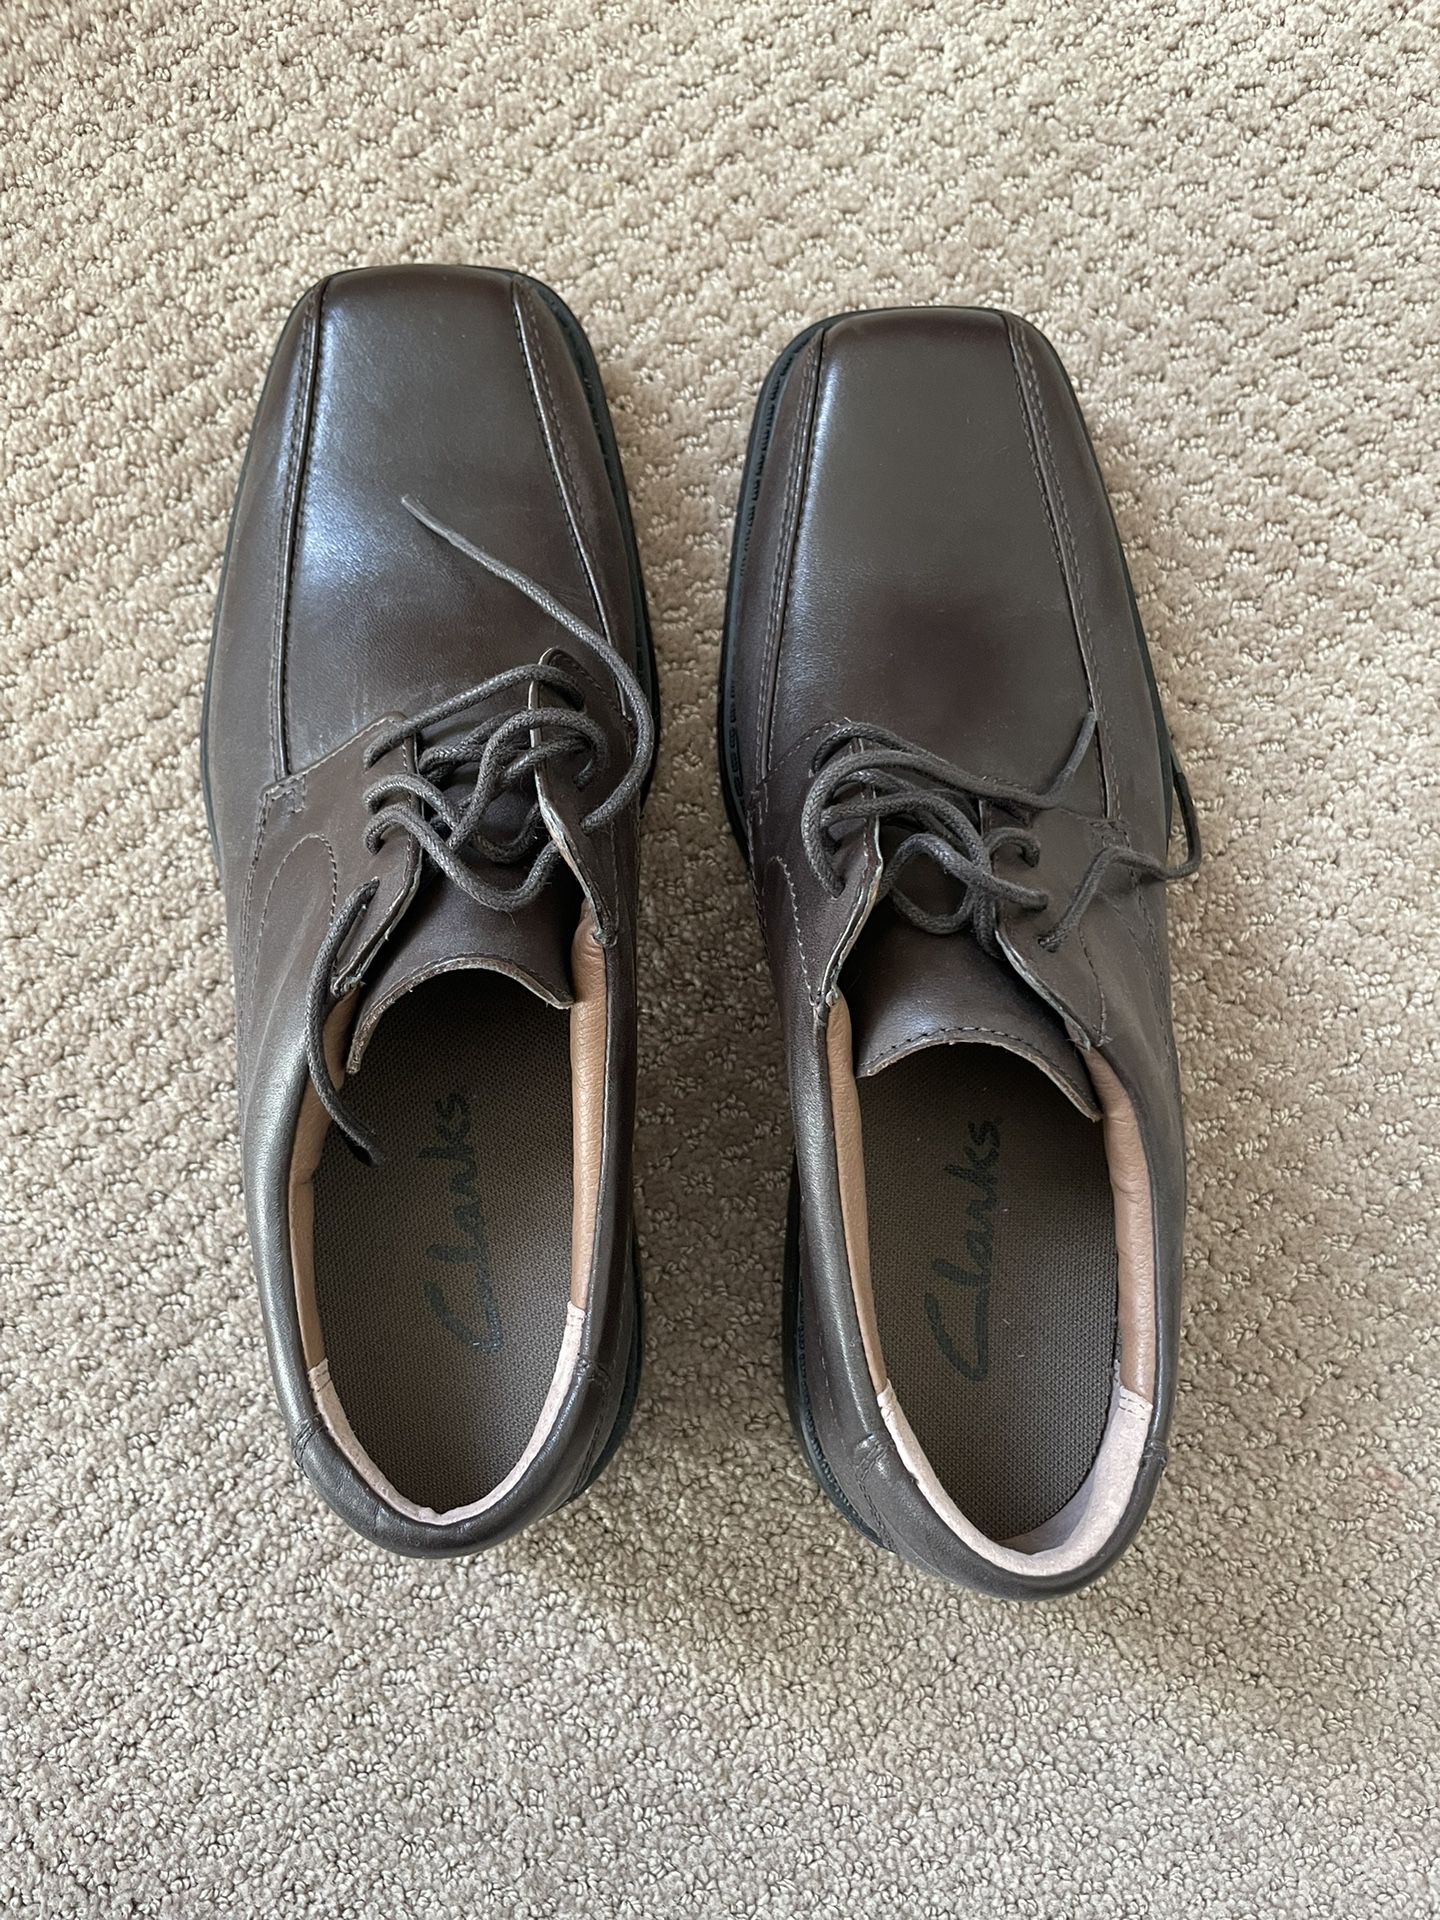 Classic Leather shoe